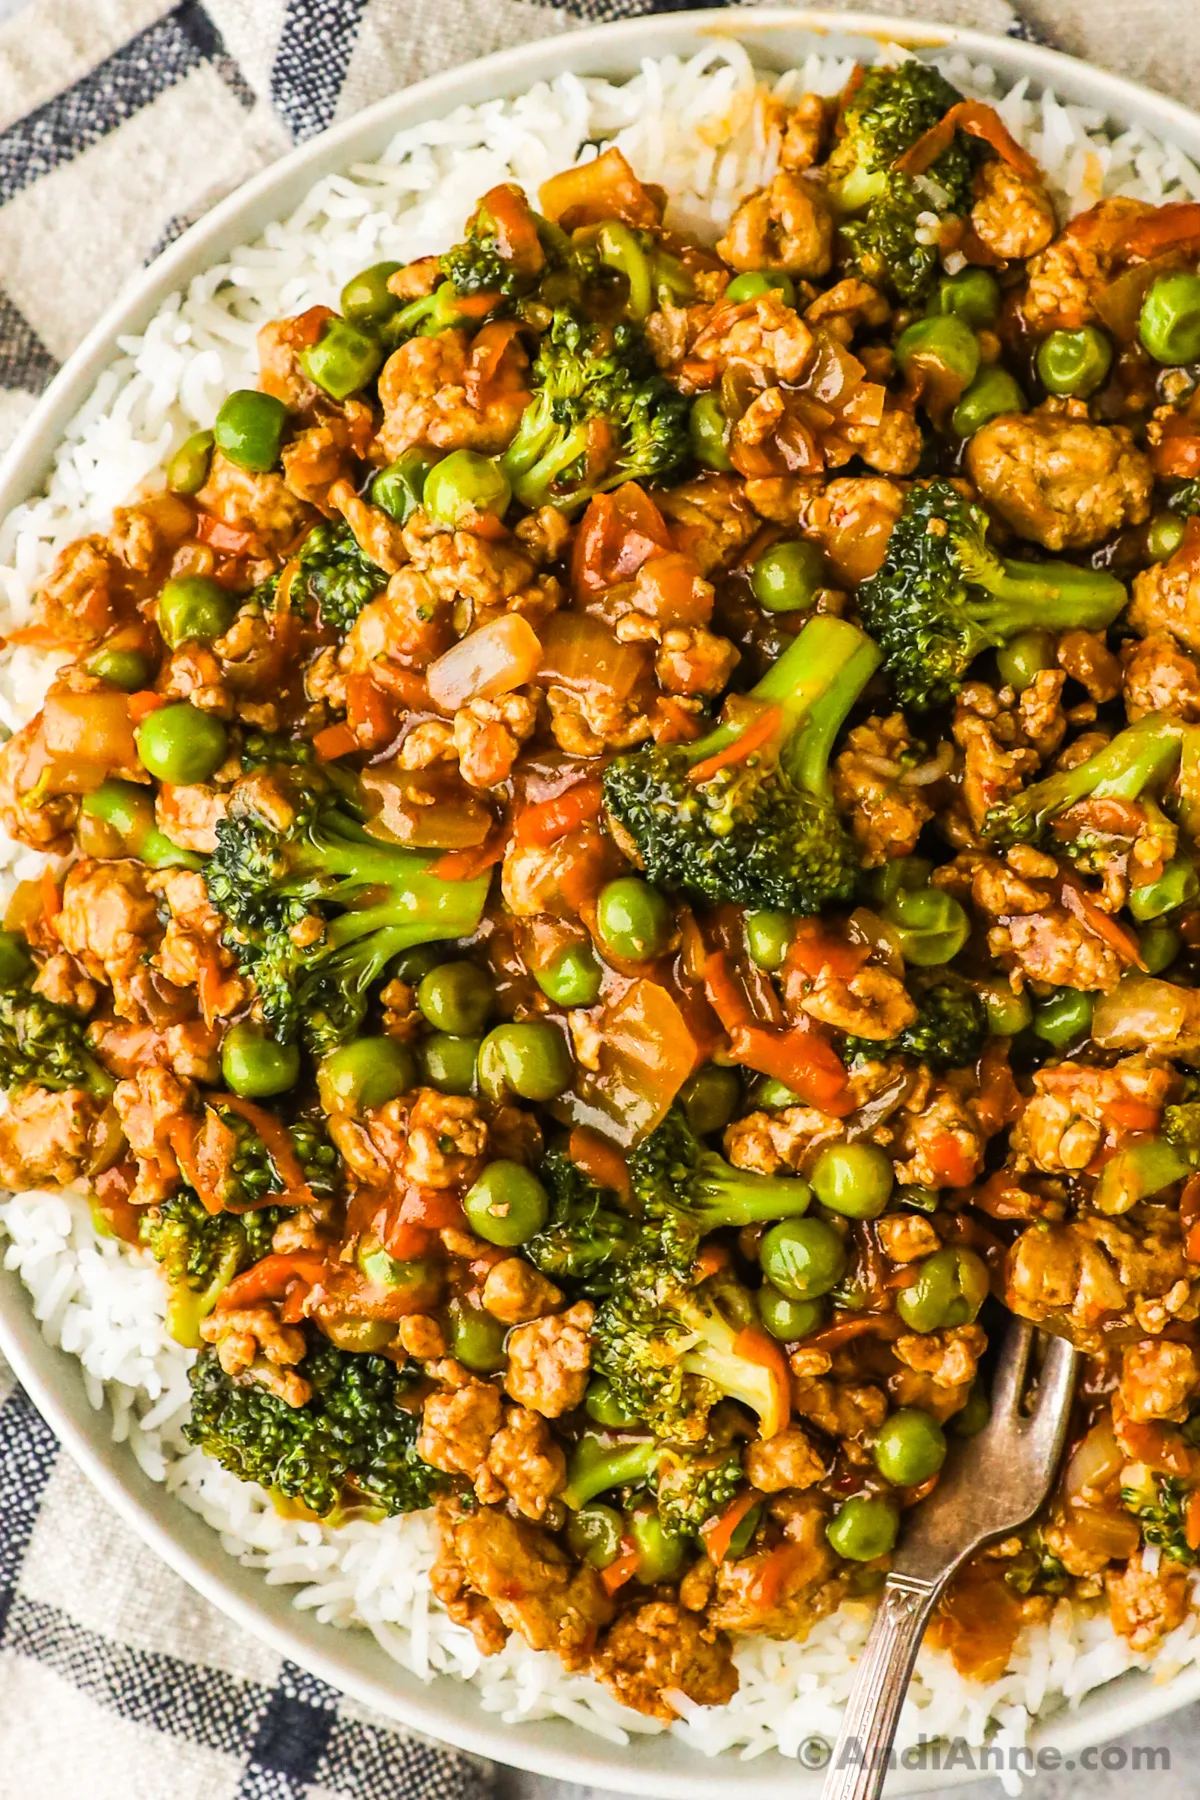 Close up of ground turkey with broccoli, peas and carrots, all in a teriyaki sauce. Sitting on a bed of rice with a plate.